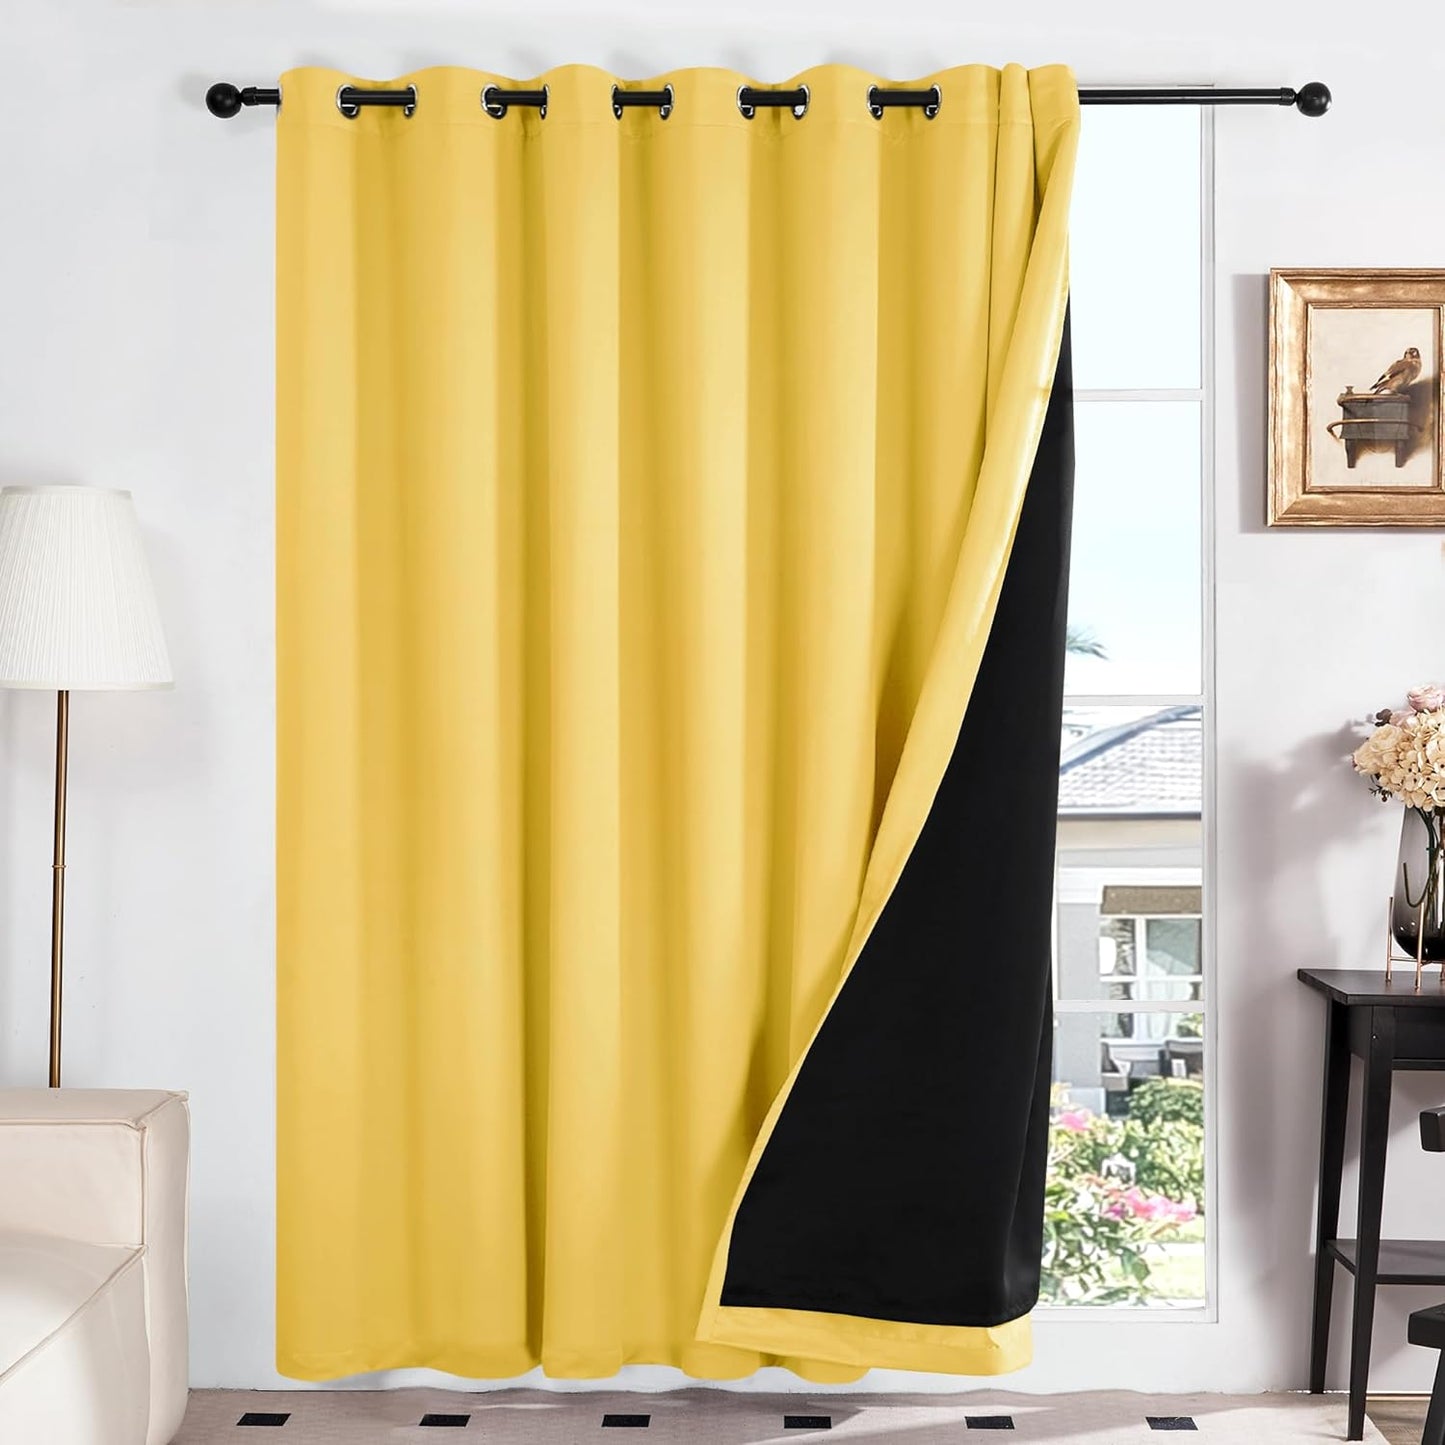 Deconovo 100% White Blackout Curtains, Double Layer Sliding Door Curtain for Living Room, Extra Wide Room Divder Curtains for Patio Door (100W X 84L Inches, Pure White, 1 Panel)  DECONOVO Yellow 100W X 95L Inch 